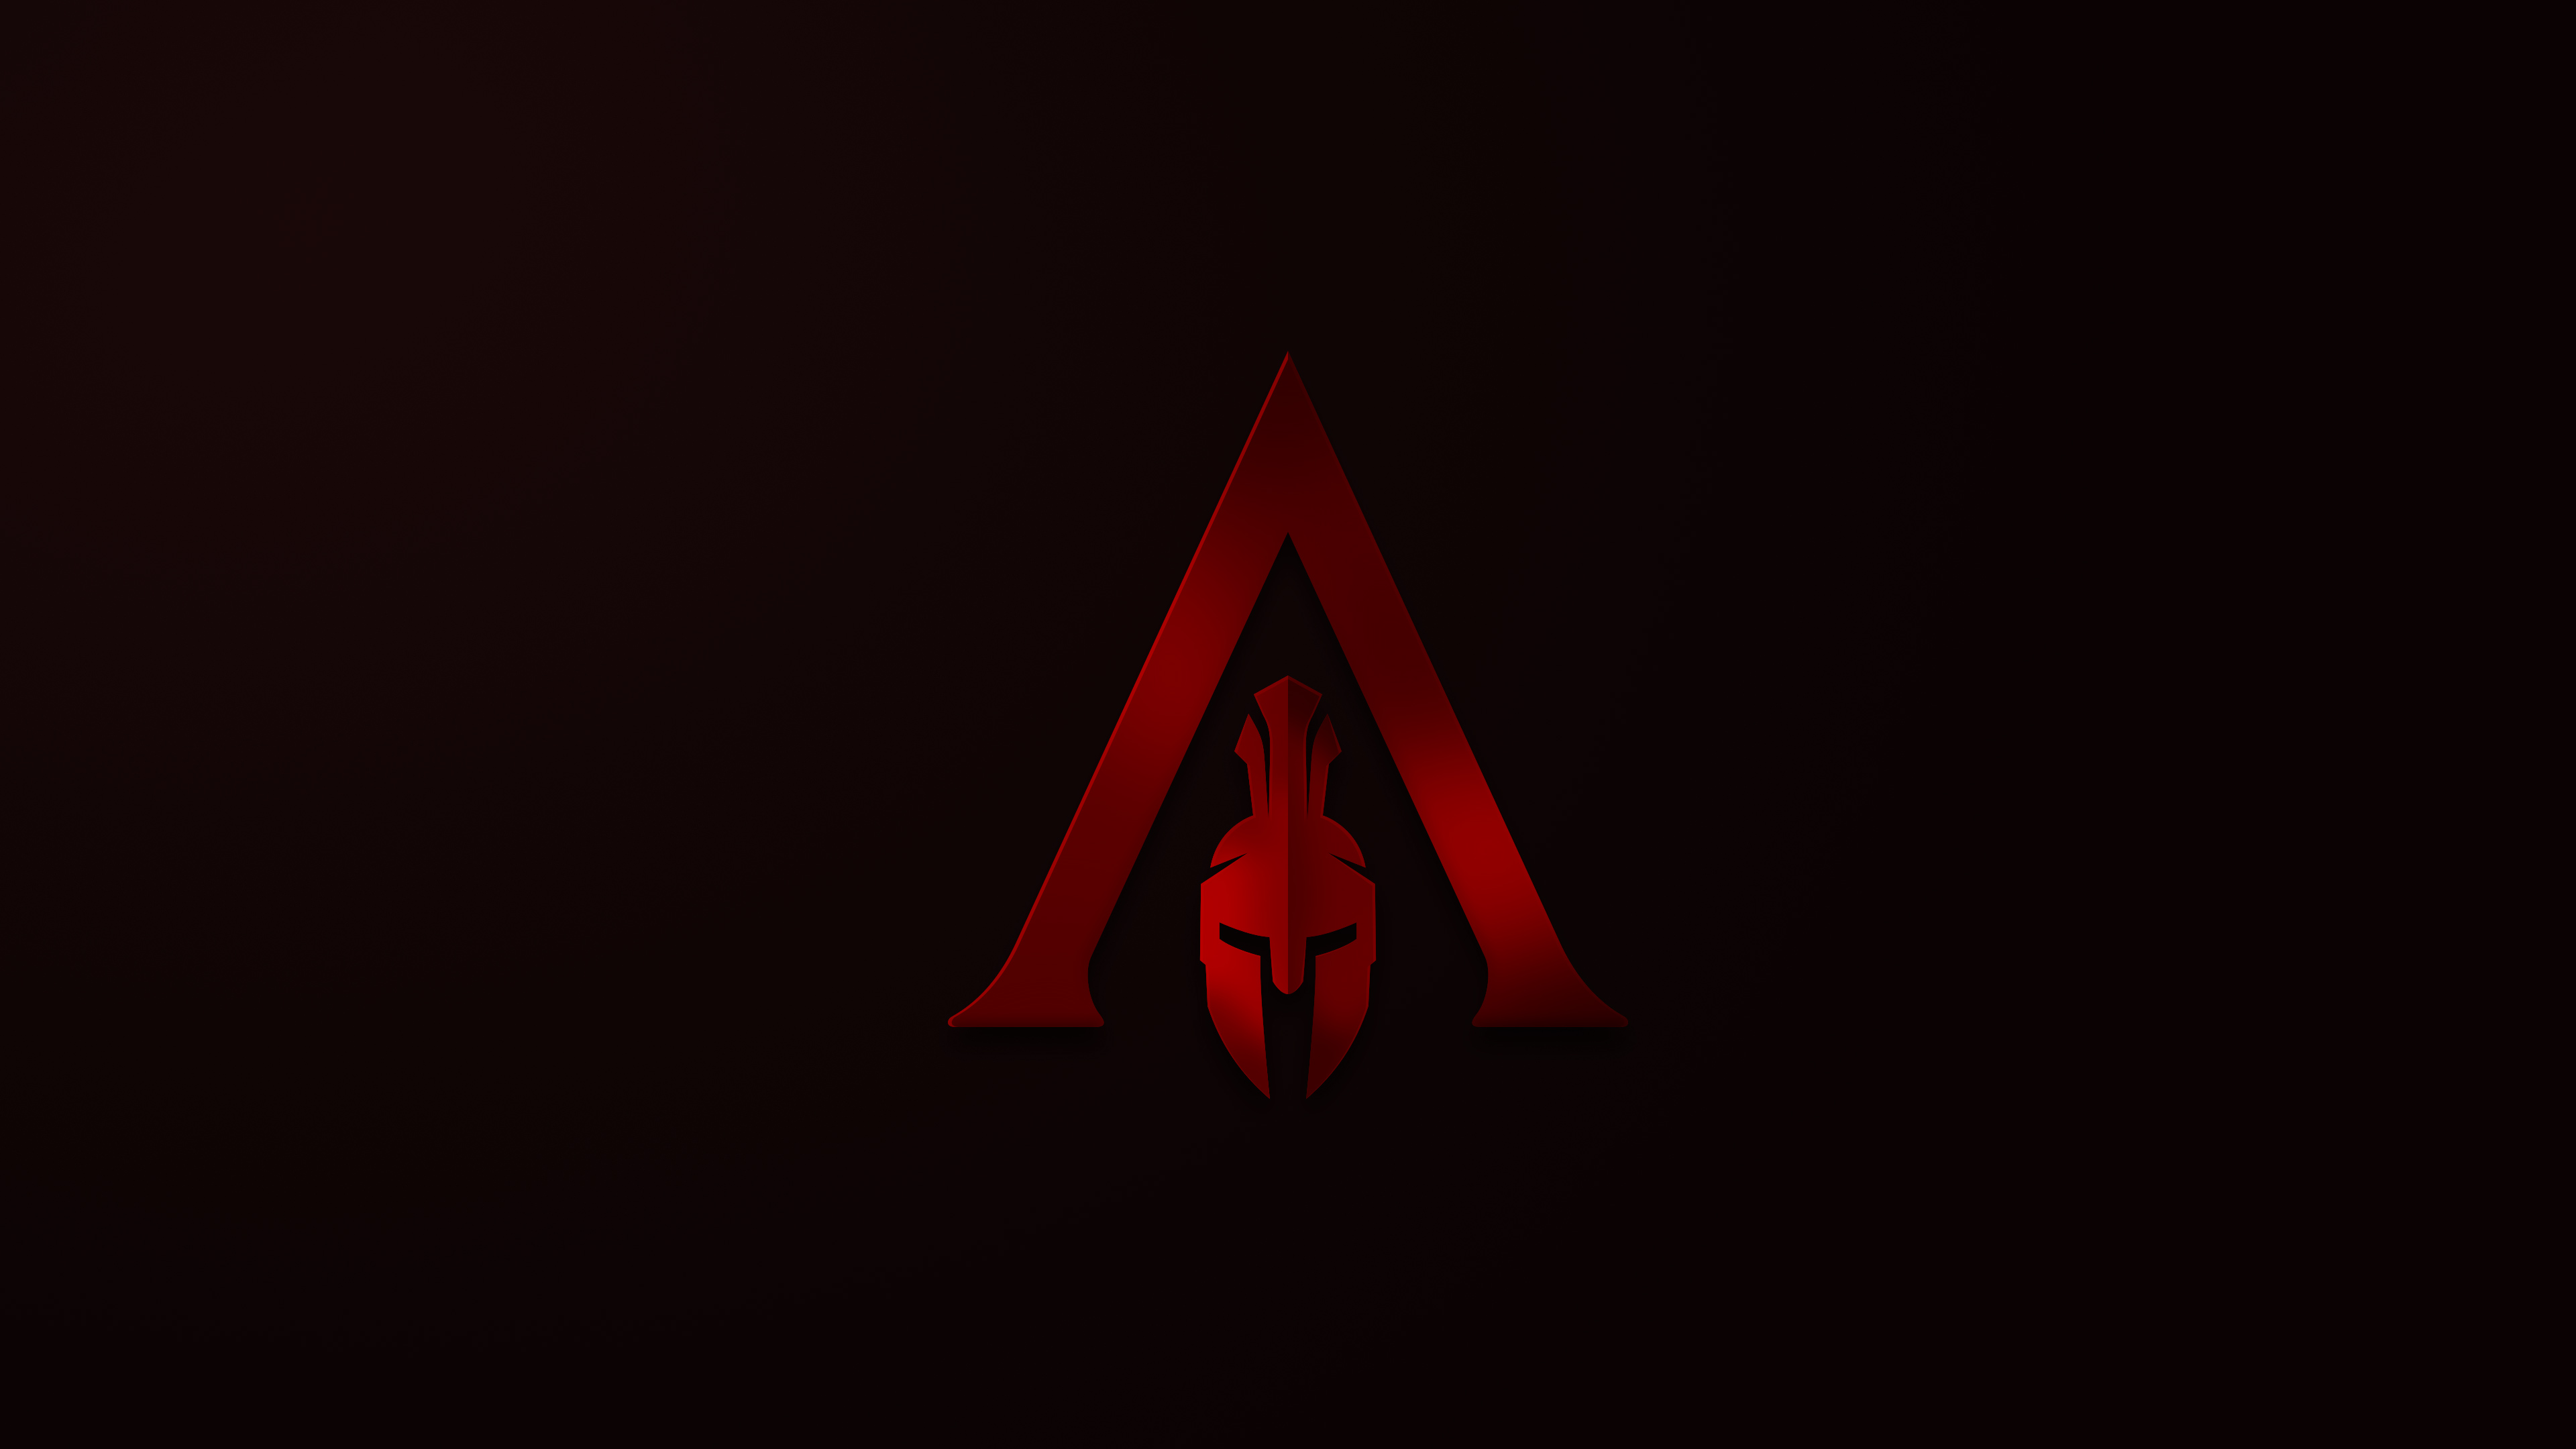 Assassin 039 S Creed 3840x2160